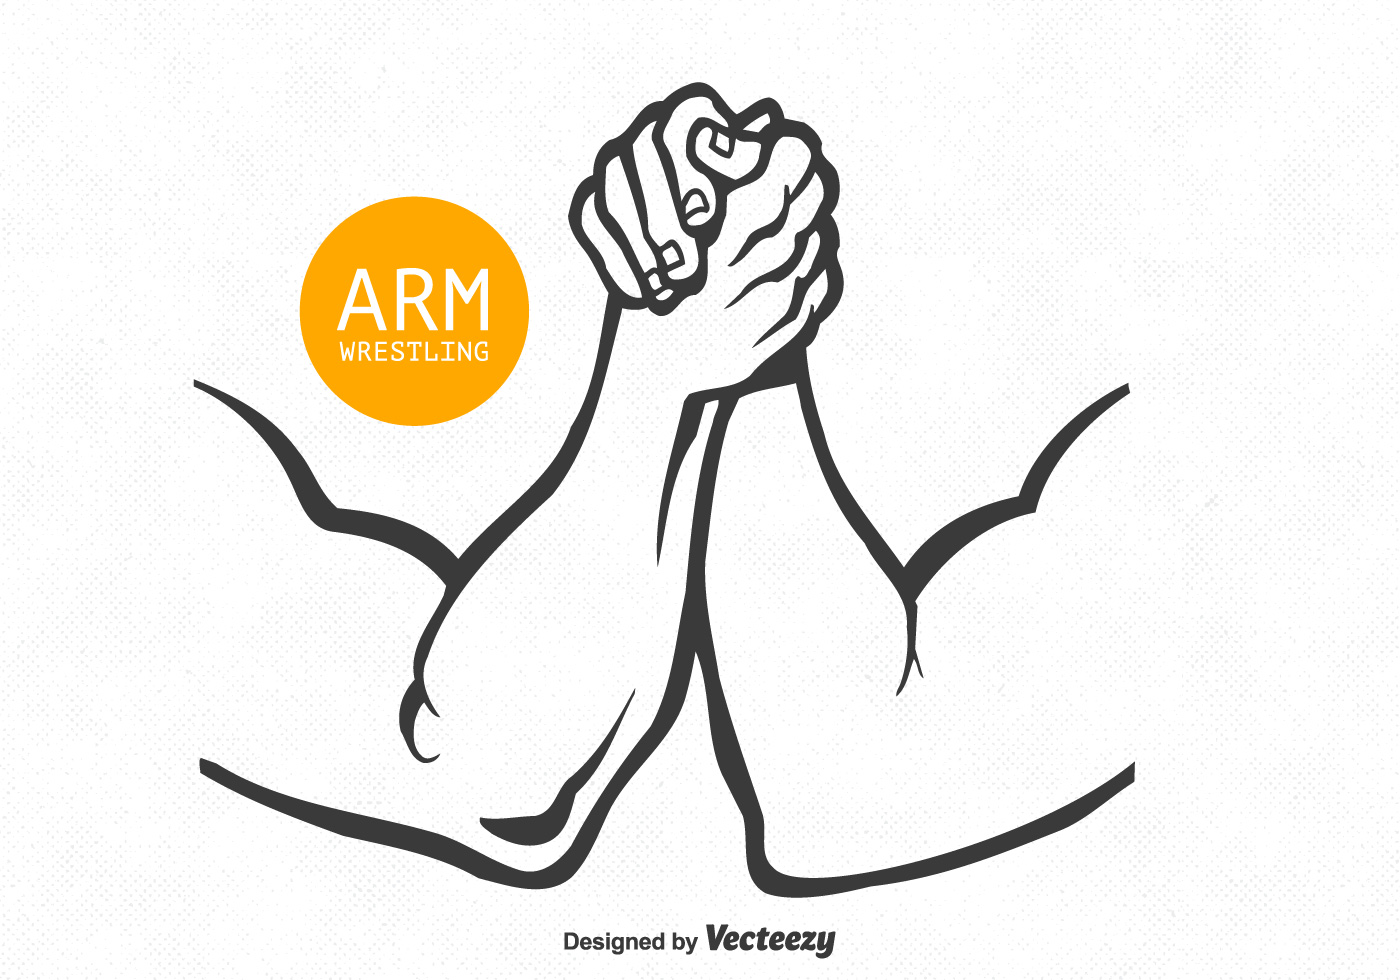 Arm Wrestling Free Vector Art 21 834 Free Downloads The goal is to pin the other's arm onto the surface, the winner's arm over the loser's arm. arm wrestling free vector art 21 834